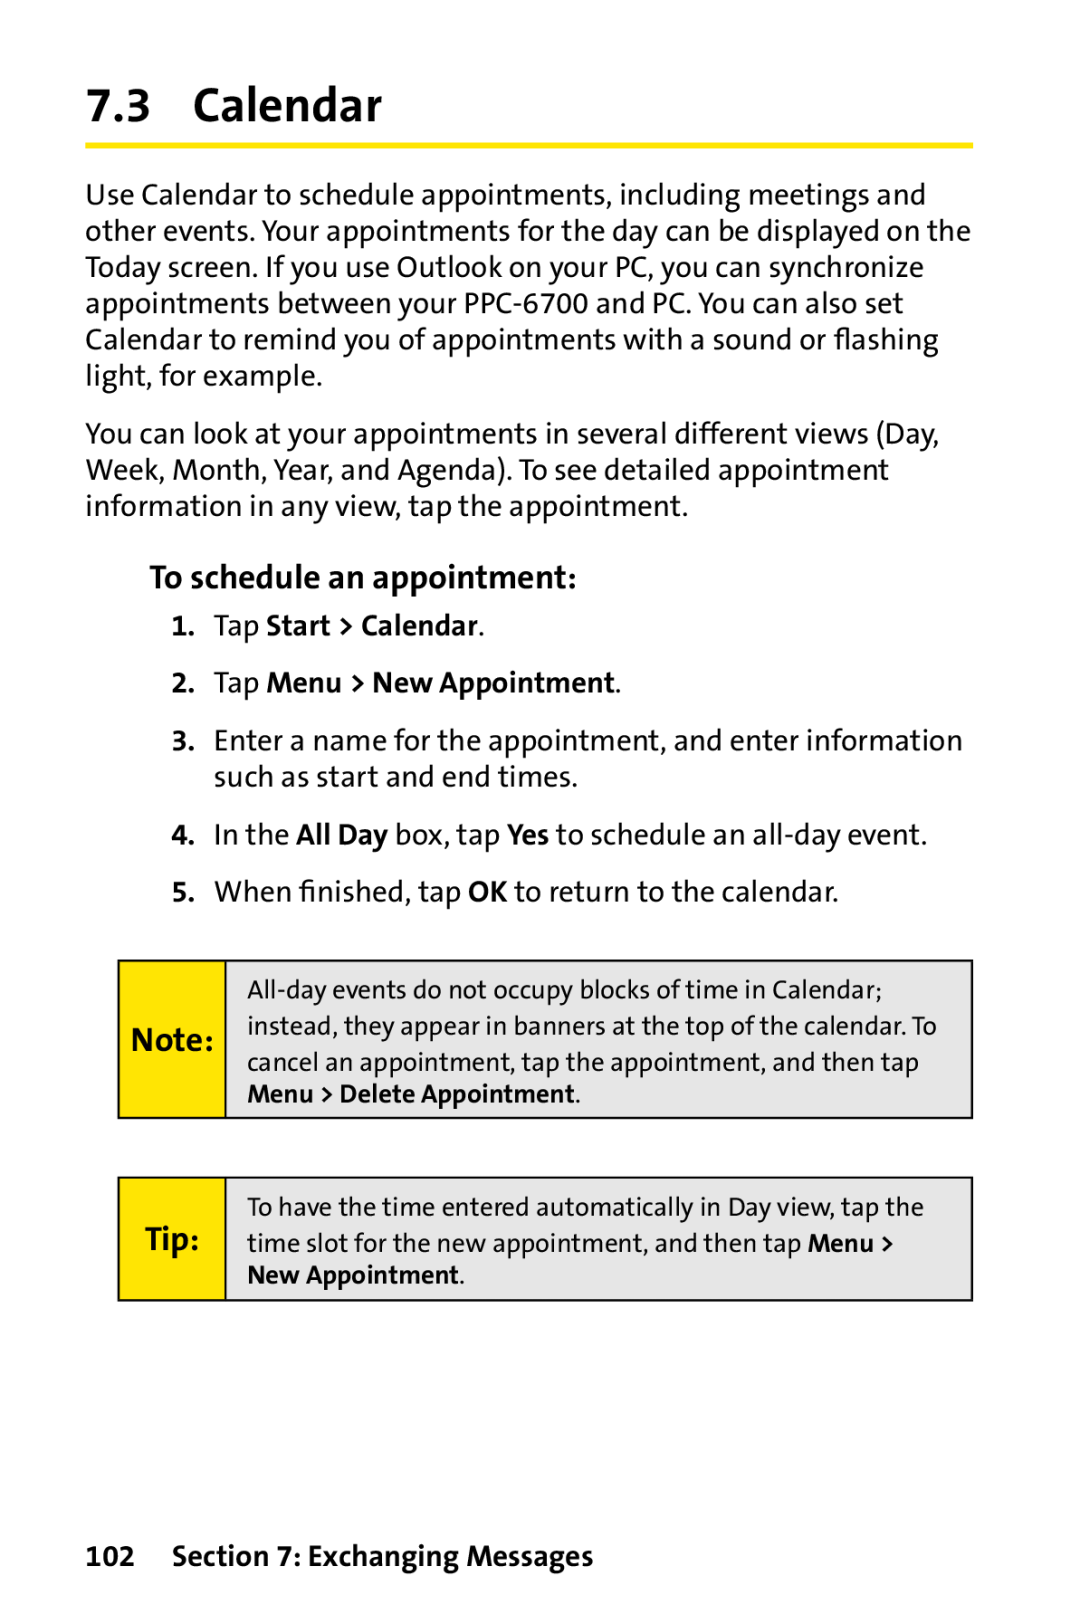 Sprint Nextel PPC-6700 To schedule an appointment, Tap Start Calendar 2. Tap Menu New Appointment, Exchanging Messages 